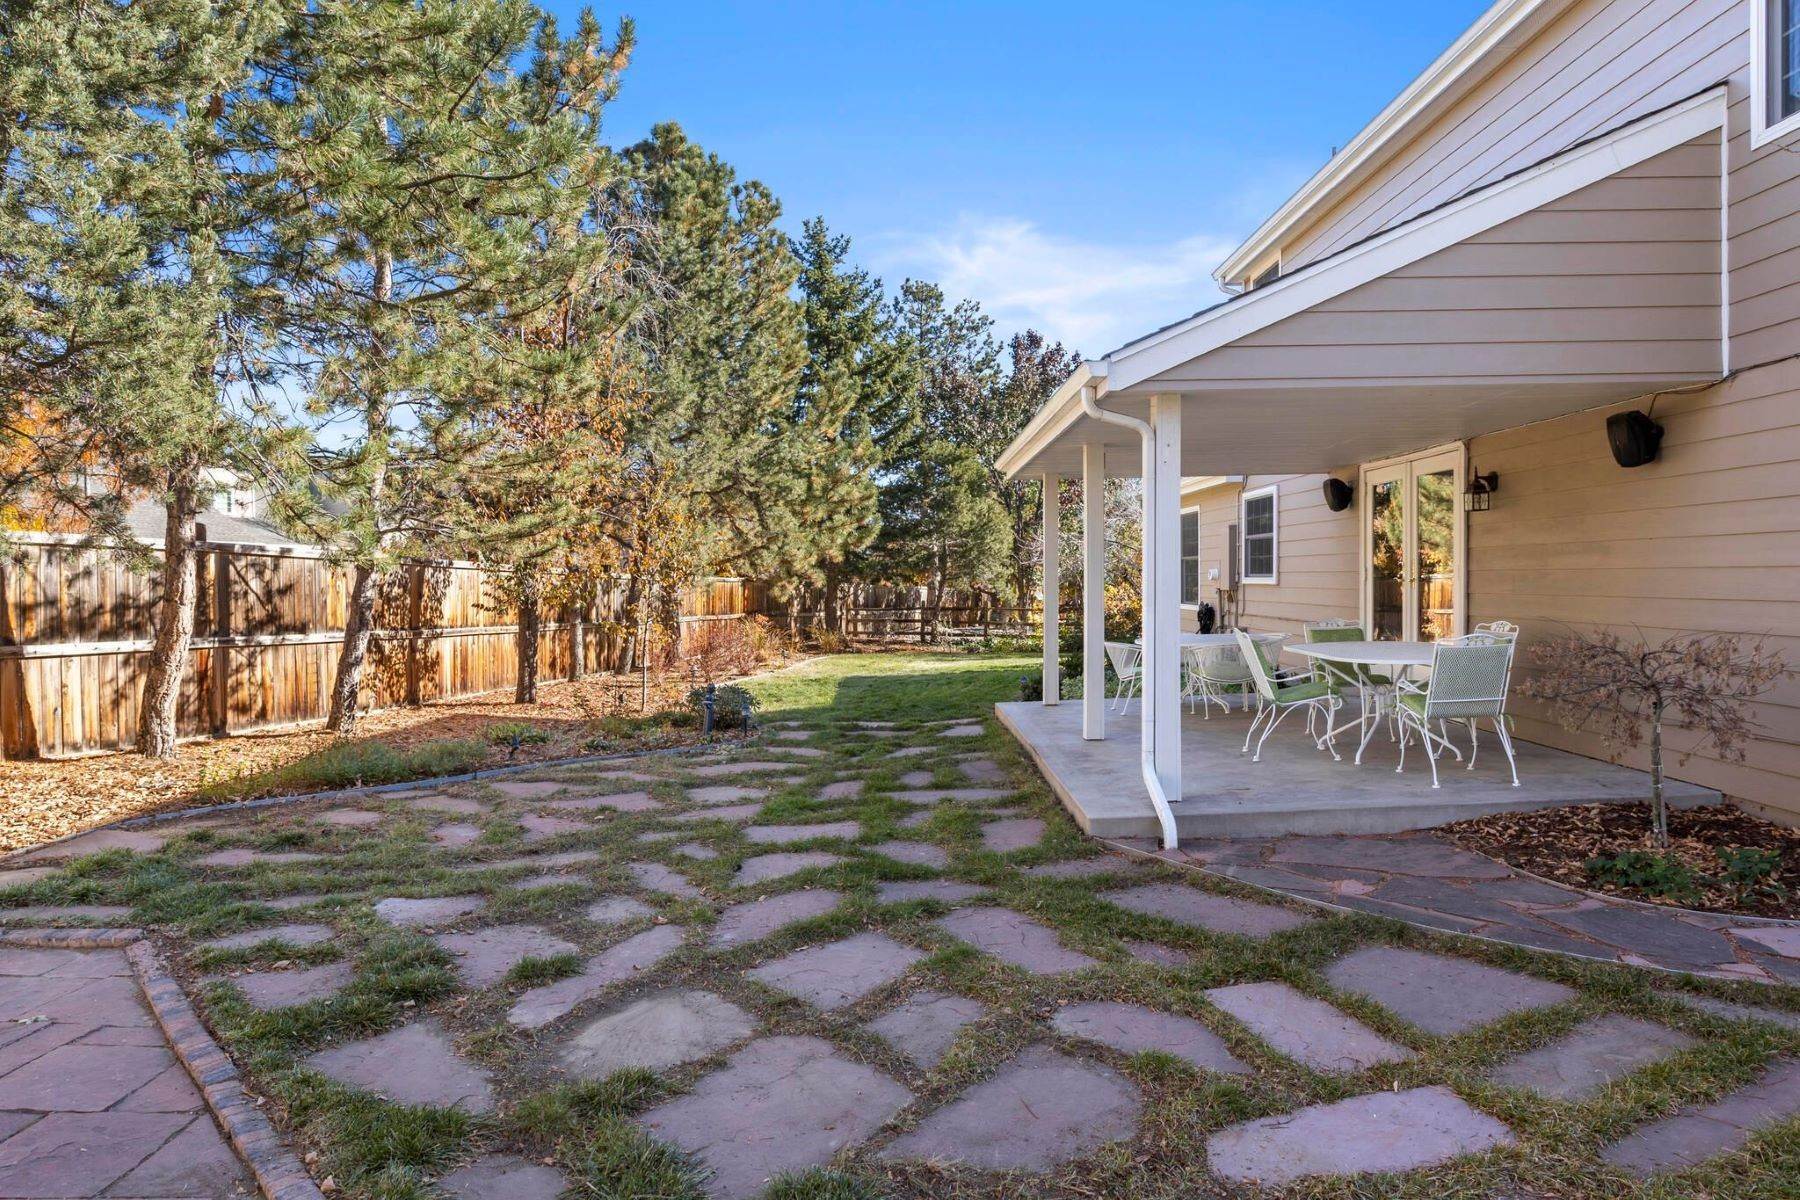 39. Single Family Homes for Active at Charming, Updated 5 Bedroom, 4 Bath Home in coveted Homestead Farm II 5631 E Kettle Place Centennial, Colorado 80112 United States